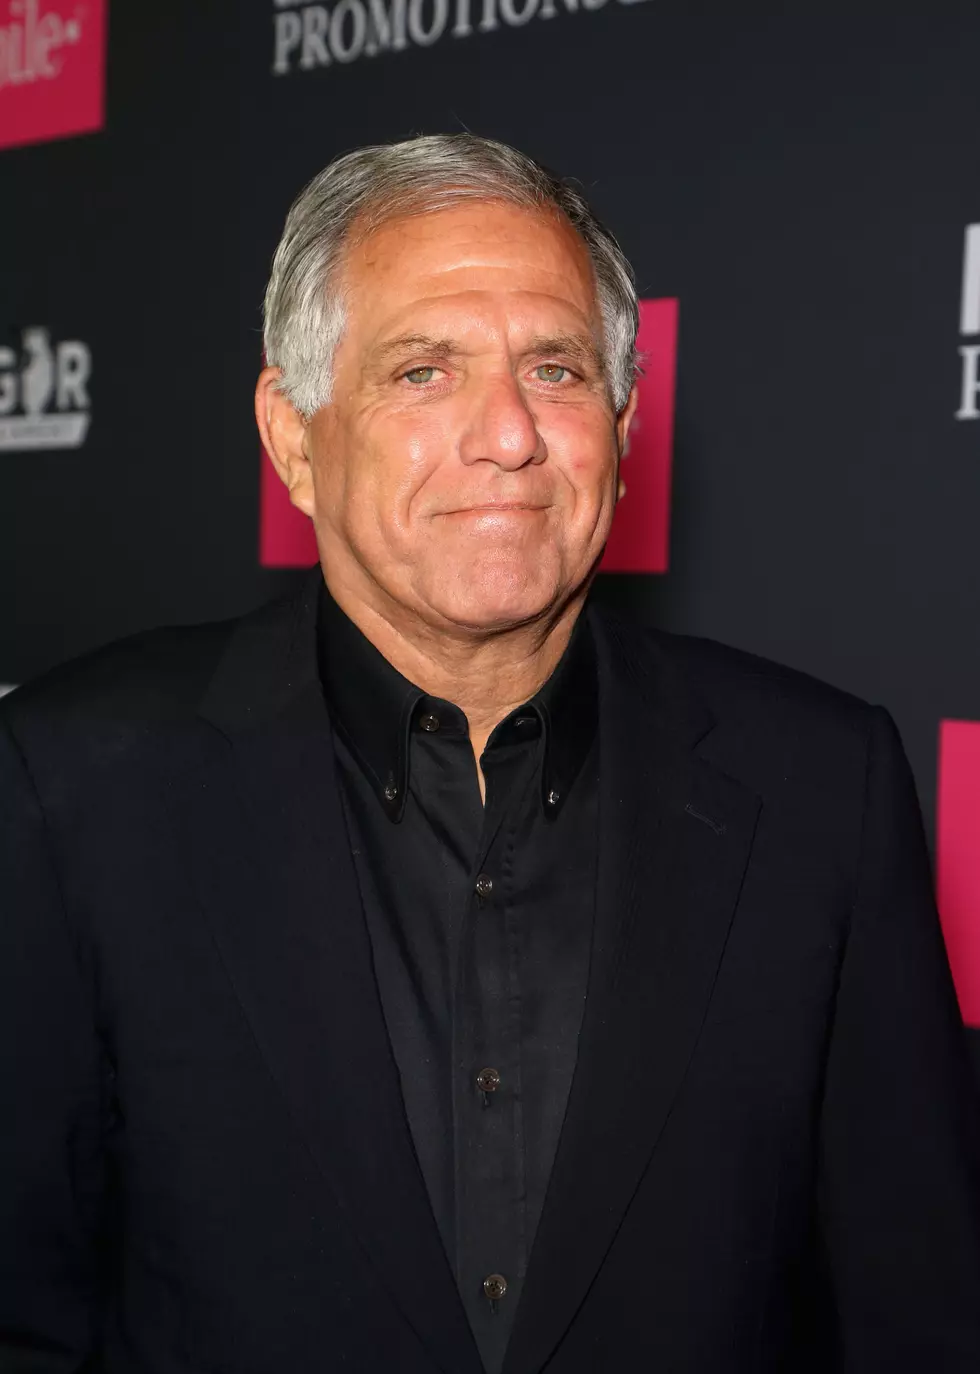 Moonves becomes latest powerful exec felled in #MeToo era